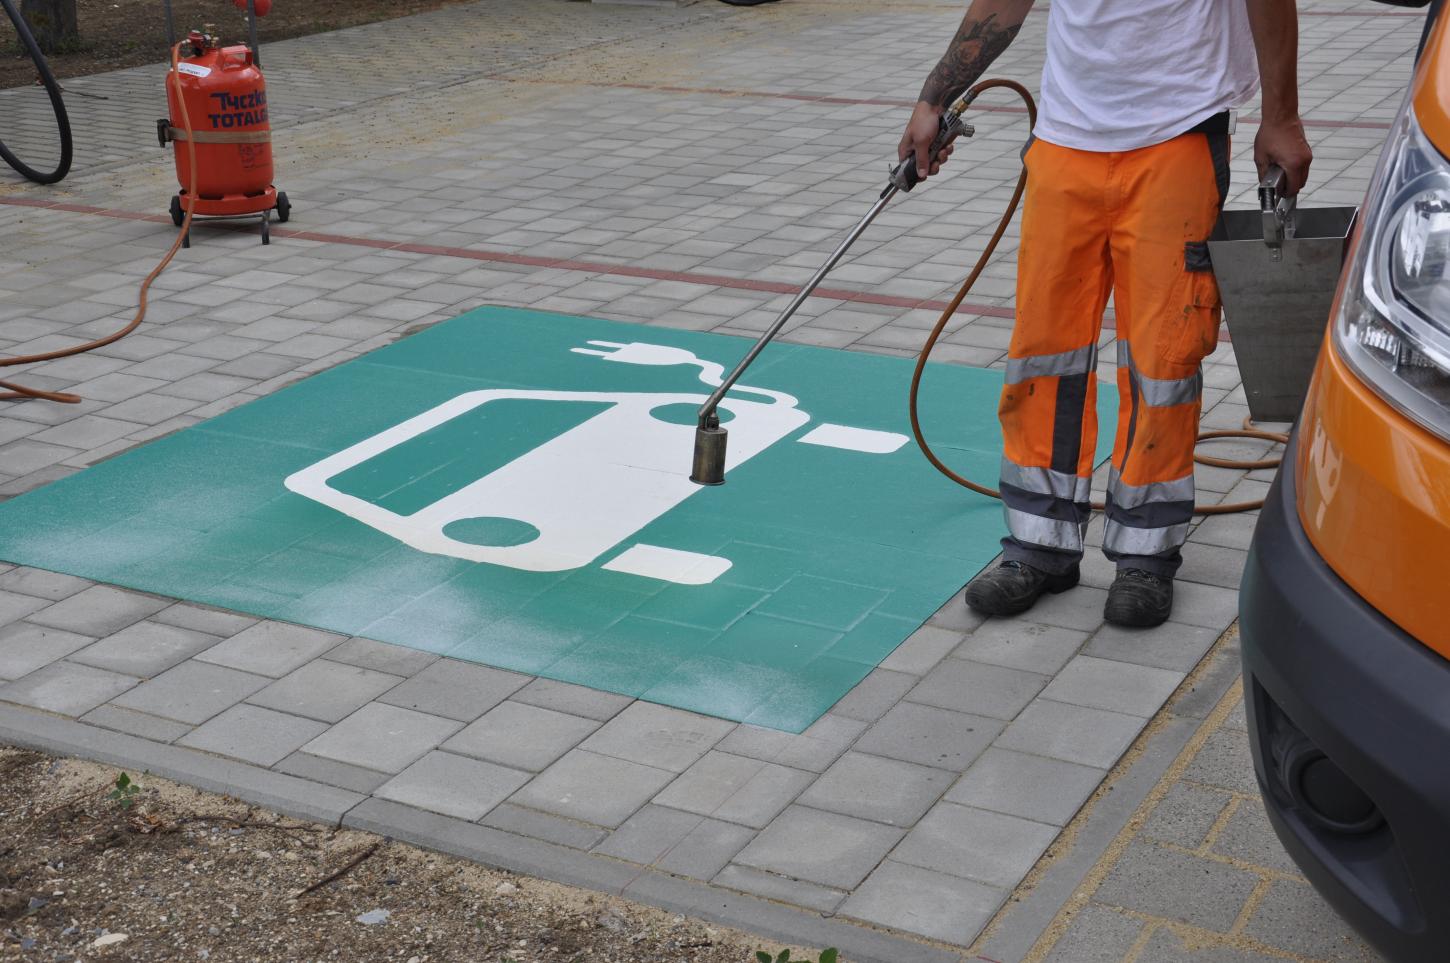 Marking work for the designation of an e-parking space